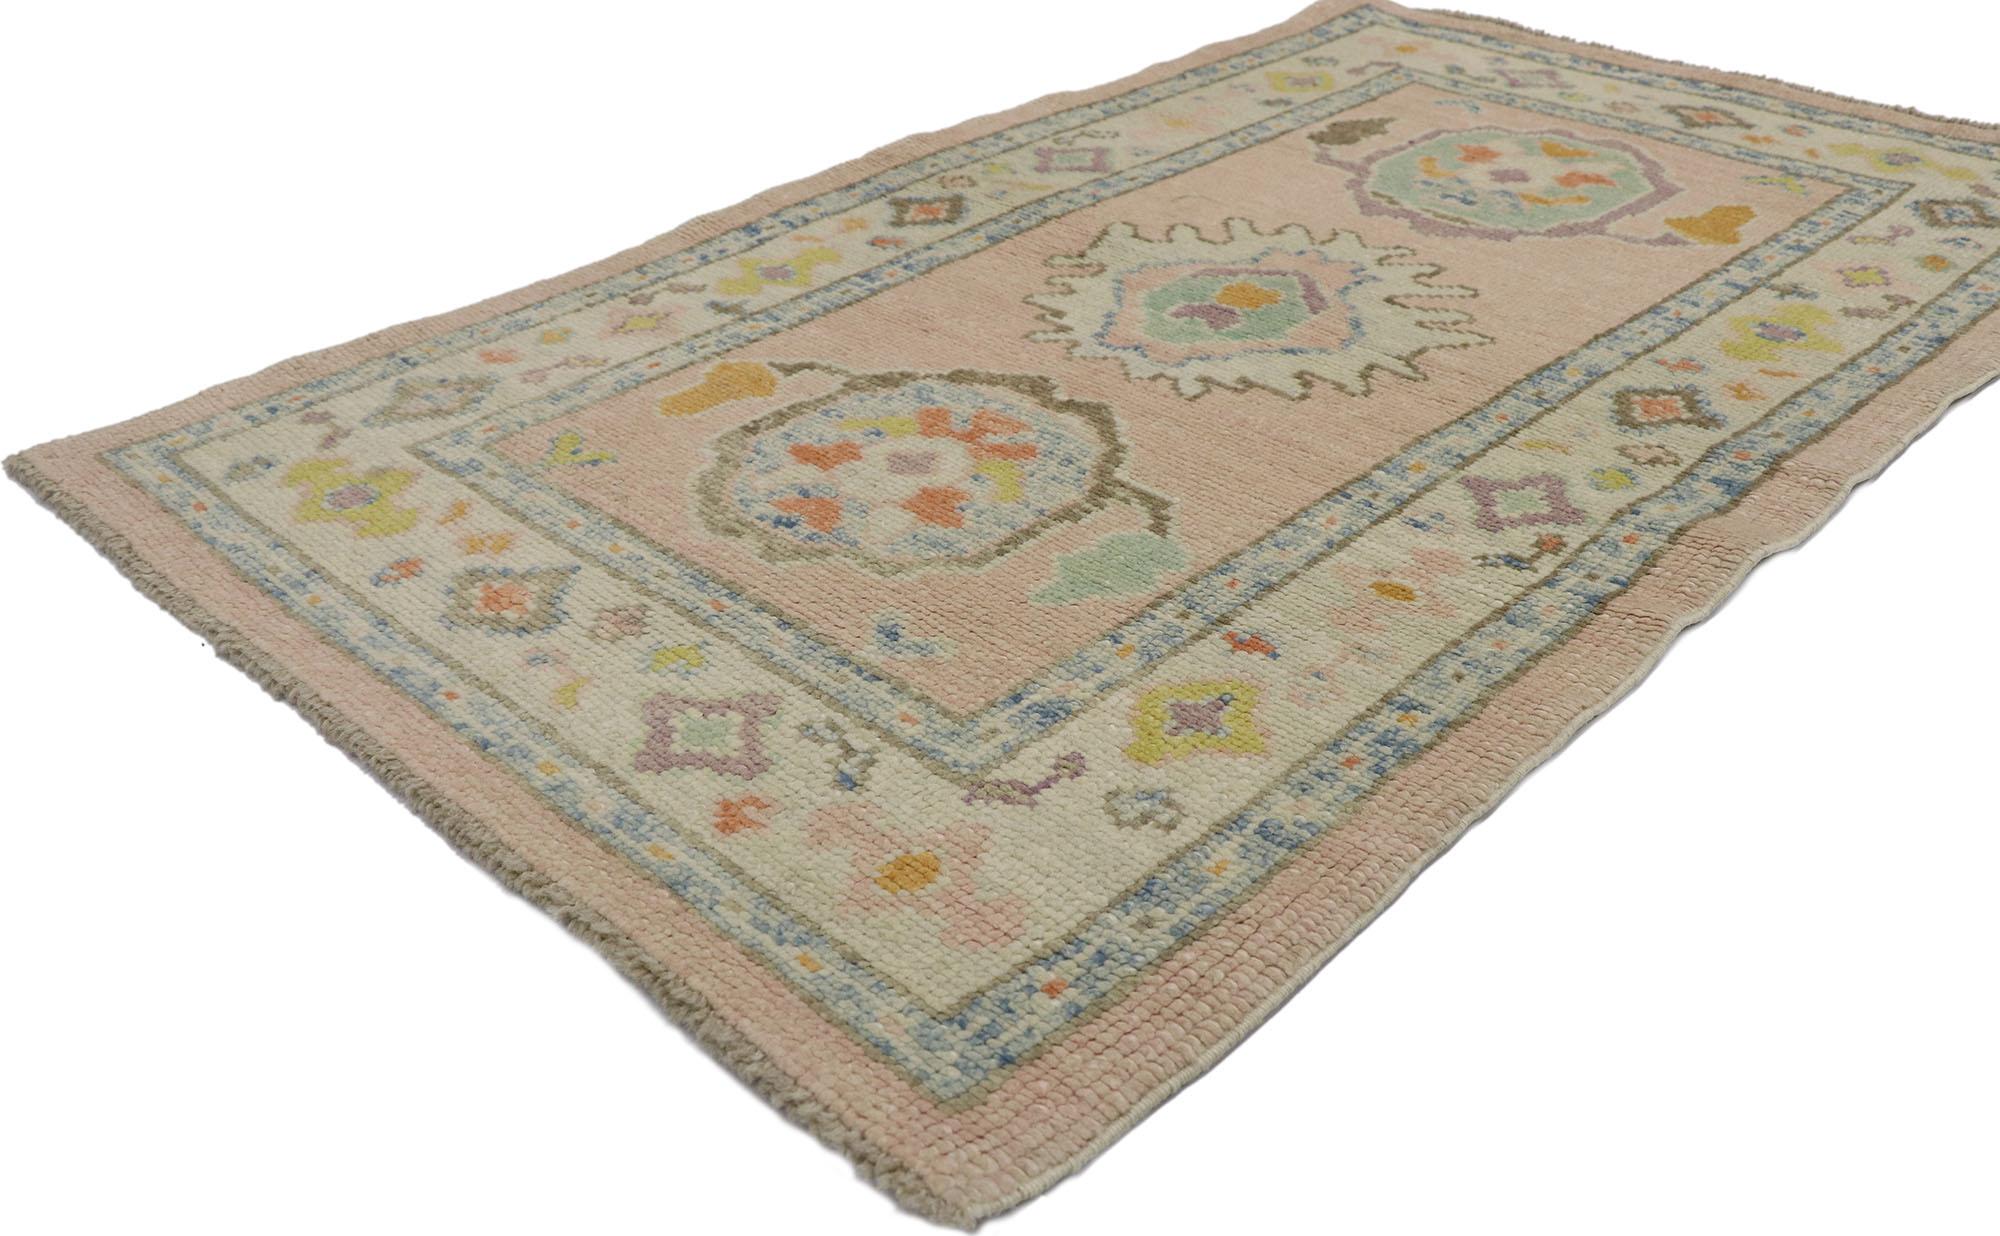 53596 New Contemporary Turkish Oushak Rug with Modern Style 03'01 x 05'01. Polished and playful, this hand-knotted wool small Turkish Oushak rug beautifully embodies a modern style. The abrashed light pink field features three colorful